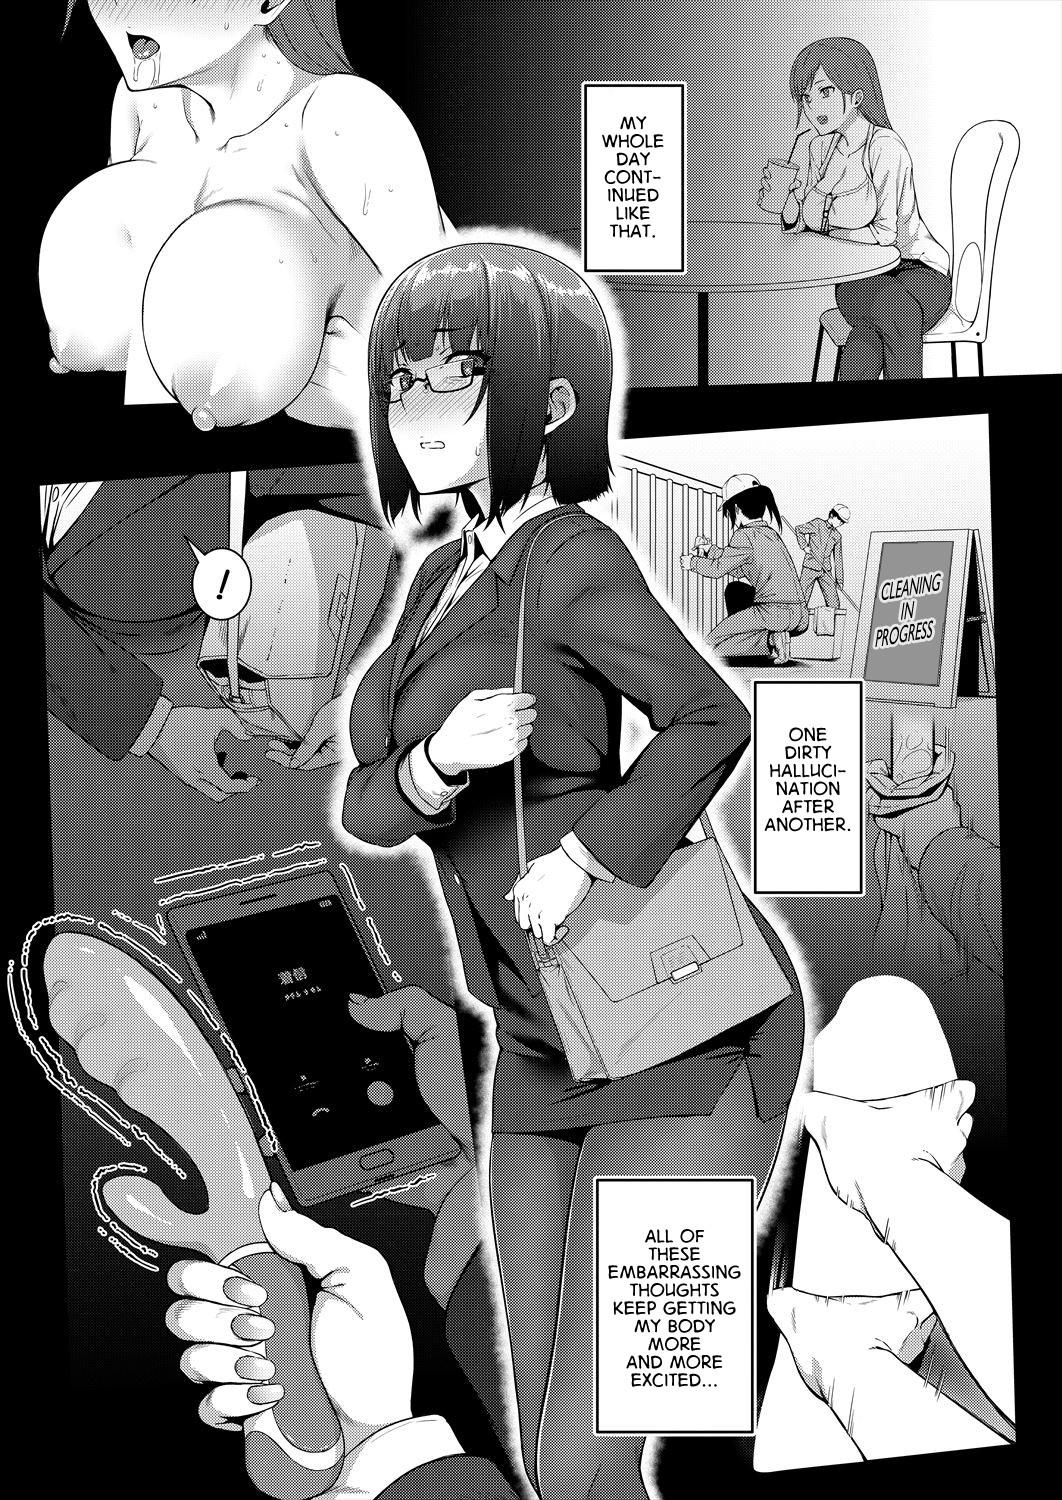 3some Kankyouon Ch. 1 | Banging Ambience Ch. 1 - Original Chicks - Page 10